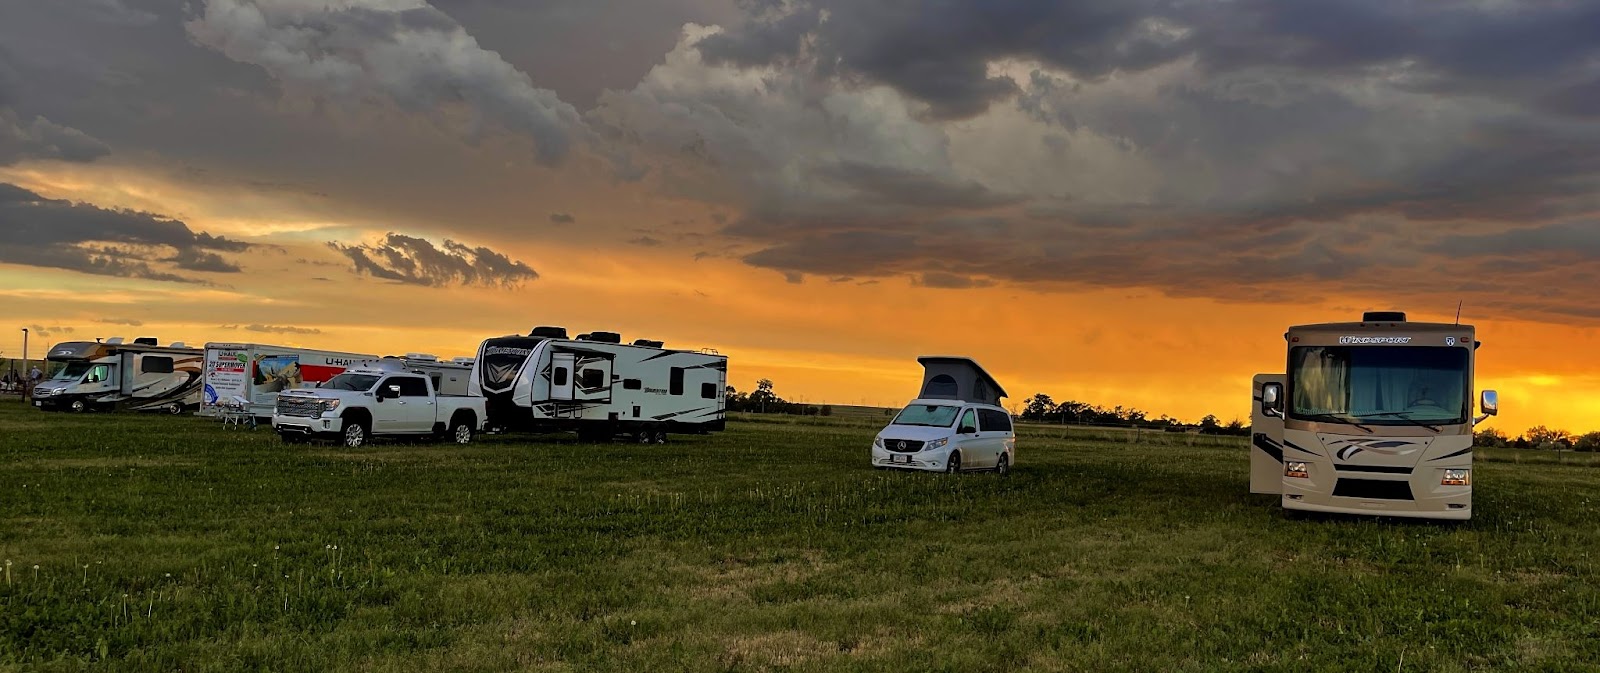 Harvest Host location with RVs camping